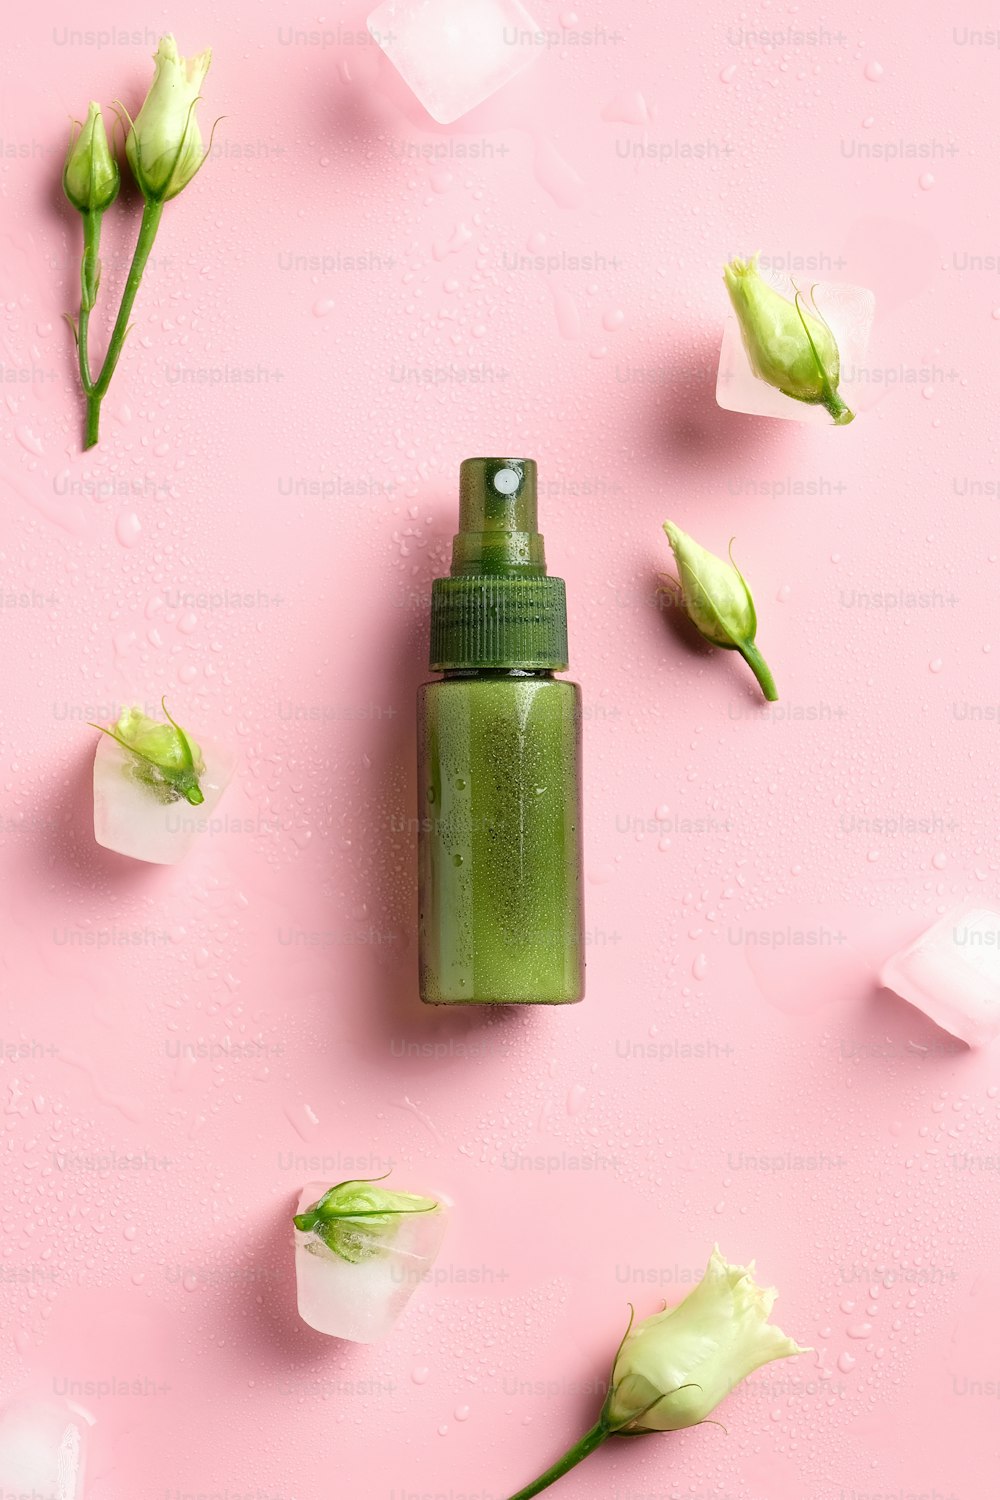 Green spray bottle, ice cubes and spring flowers on pink background. Flat lay, top view. Natural cosmetics concept.